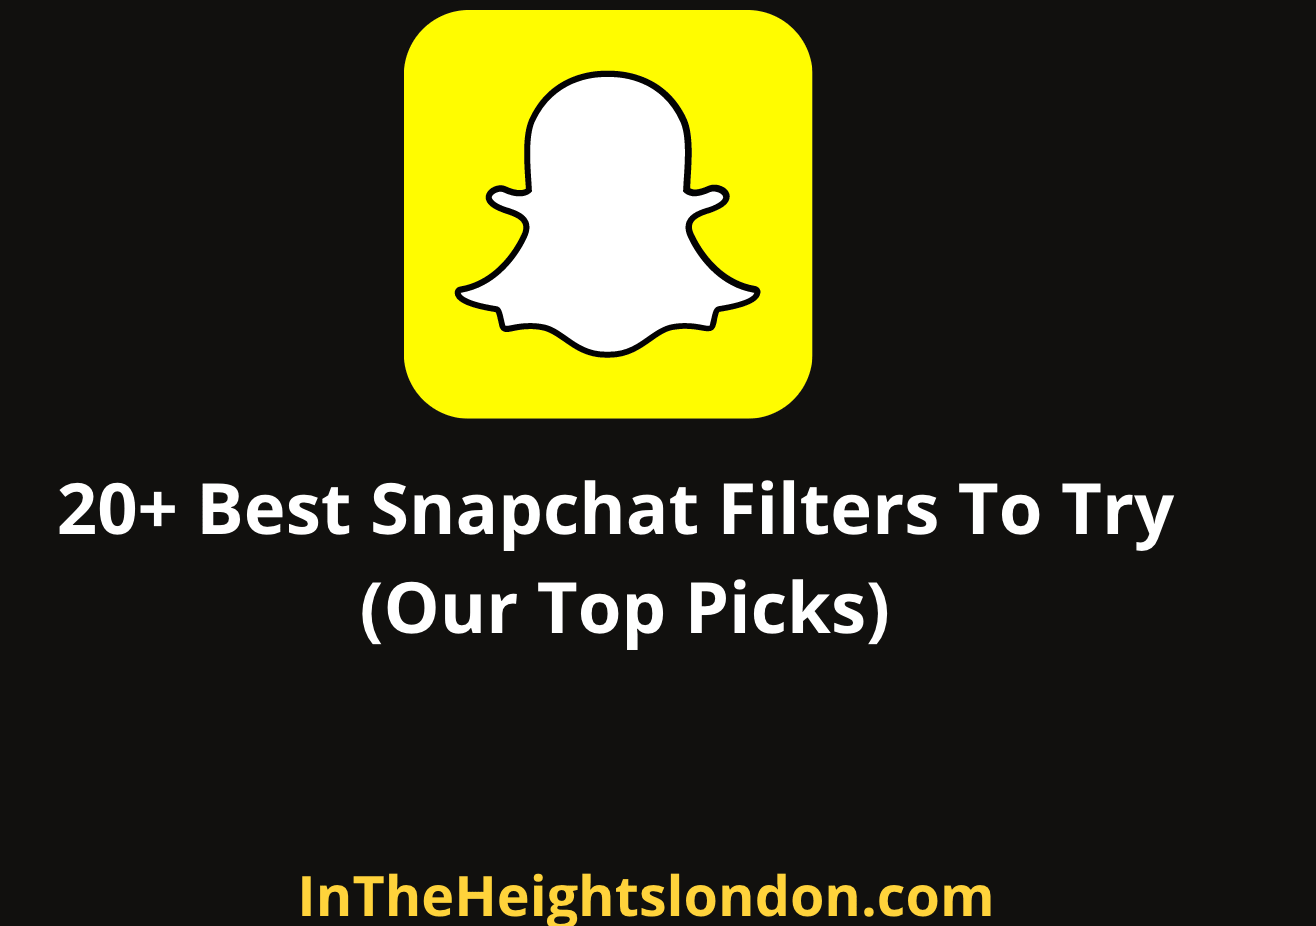 20+ Best Snapchat Filters To Try in 2023